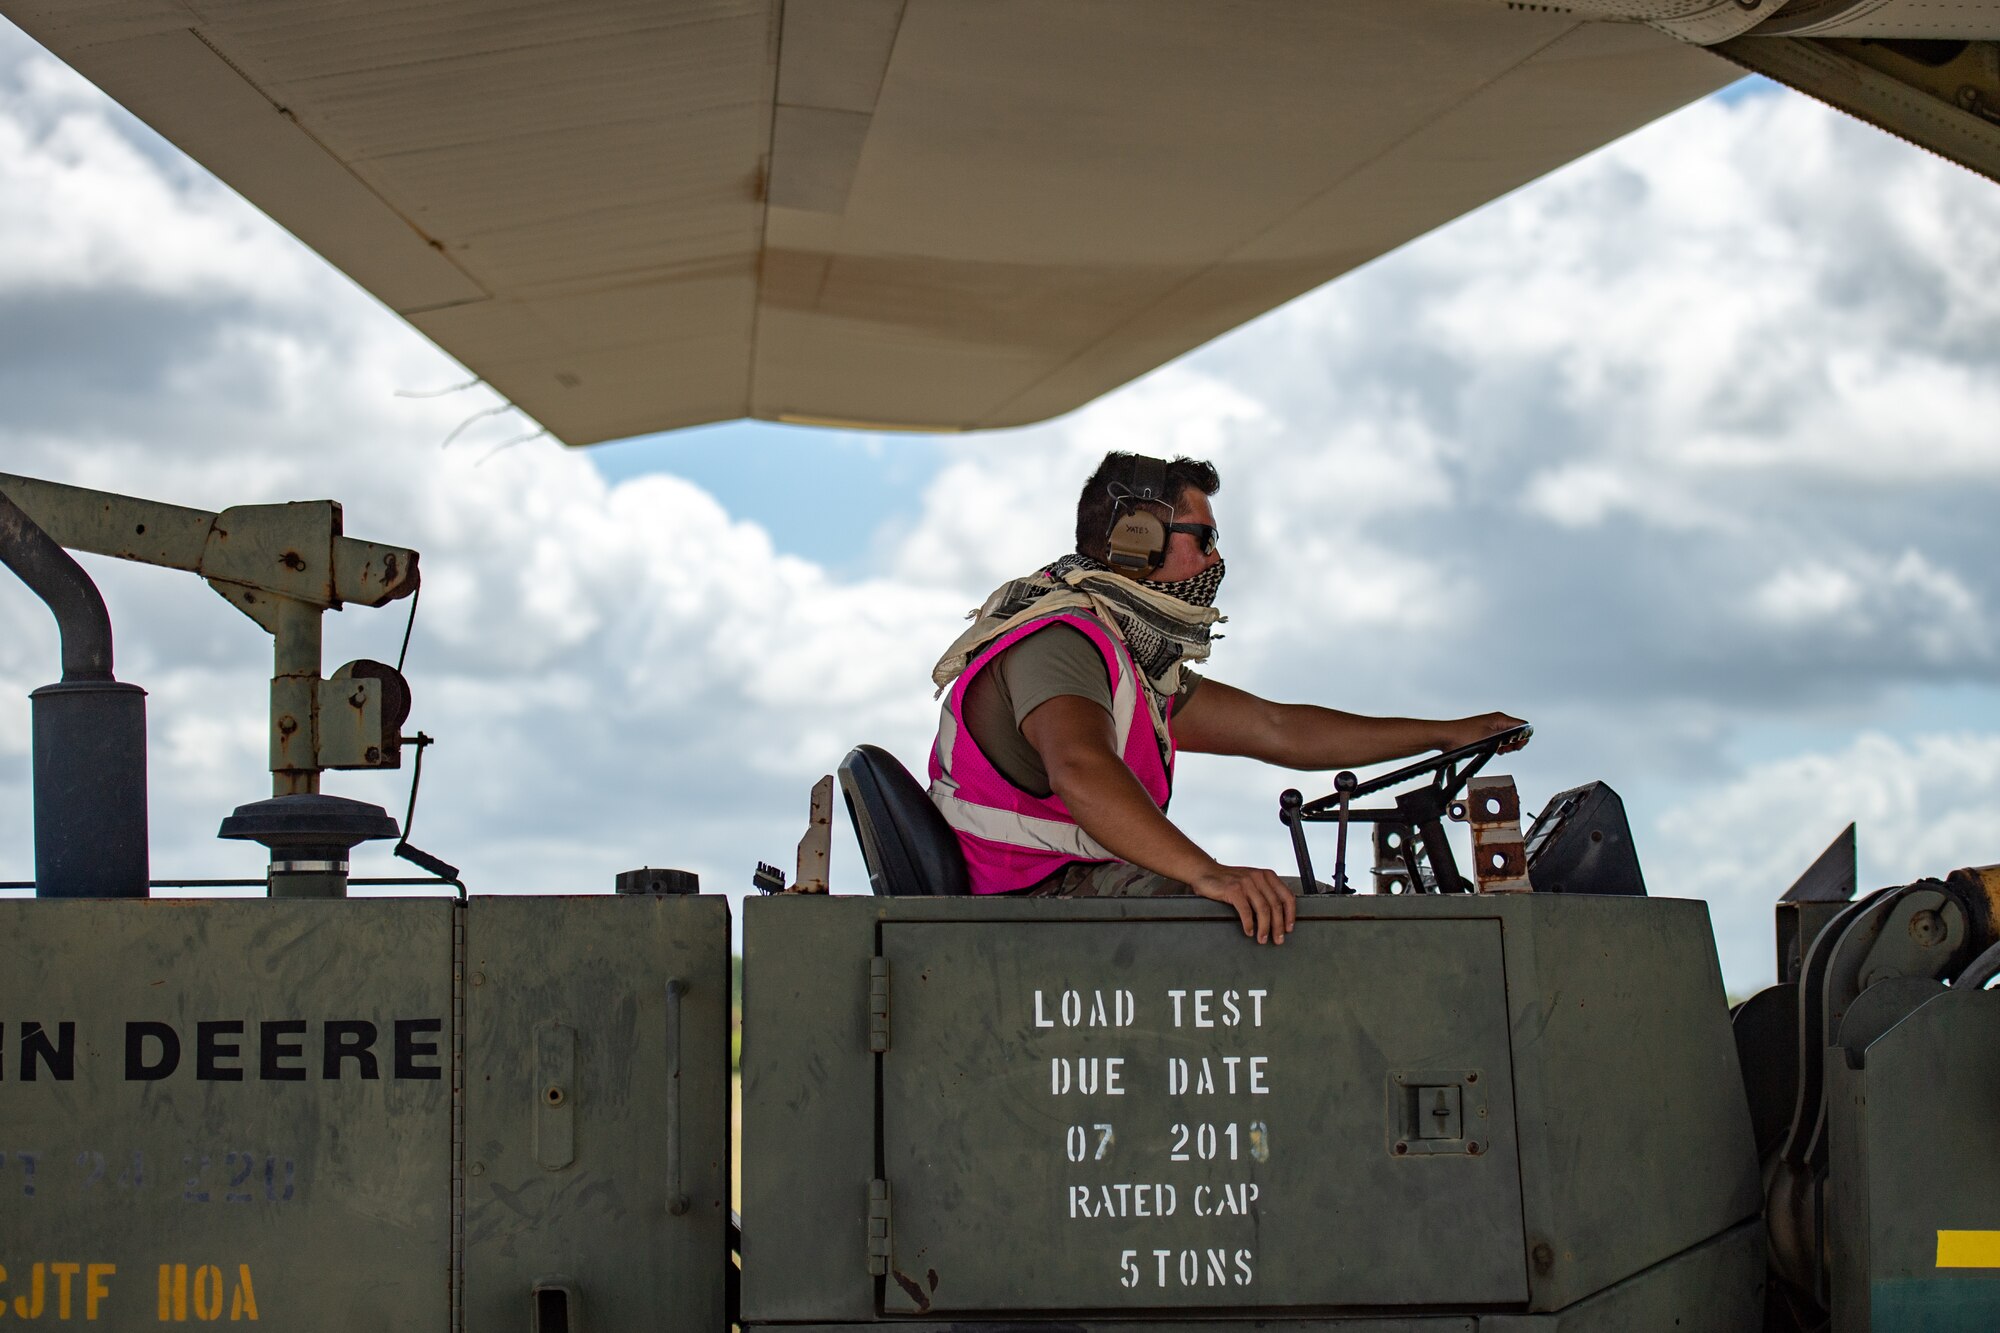 U.S. Air Force Tech. Sgt. Gary Yates, 475th Expeditionary Air Base Squadron air operations noncommissioned officer in charge, downloads cargo at Camp Simba, Kenya, Aug. 26, 2019. Yates worked with the 75th Expeditionary Airlift Squadron aircrew who delivered the cargo to Camp Simba. (U.S. Air Force photo by Staff Sgt. Devin Boyer)